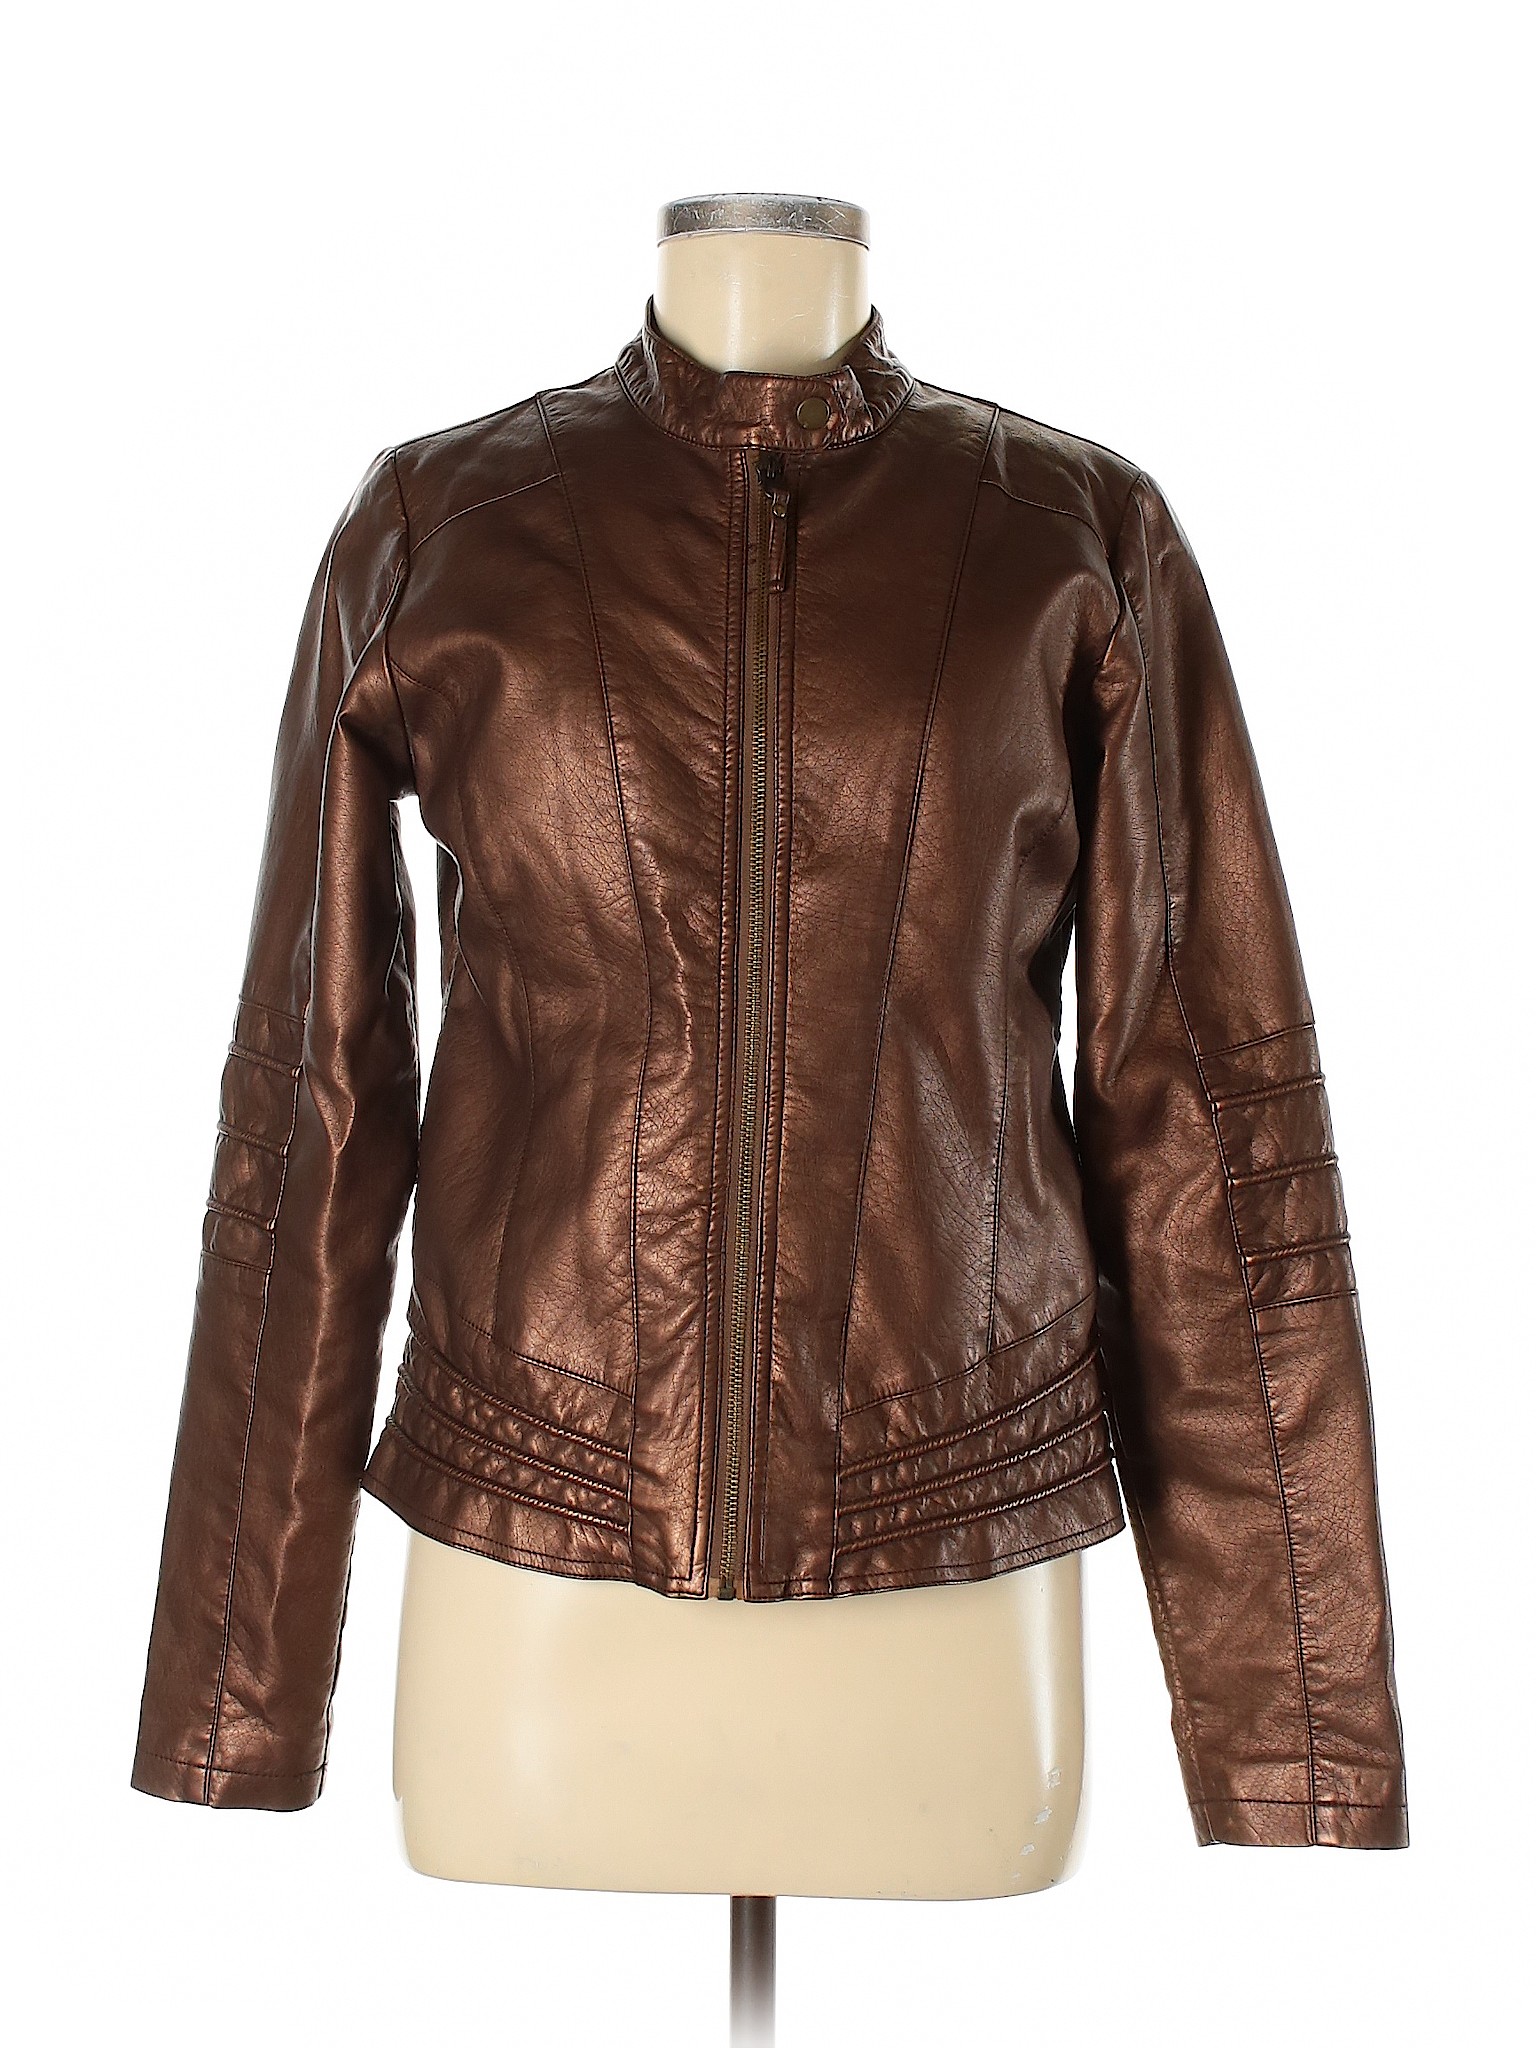 Maurices Women Brown Faux Leather Jacket M | eBay